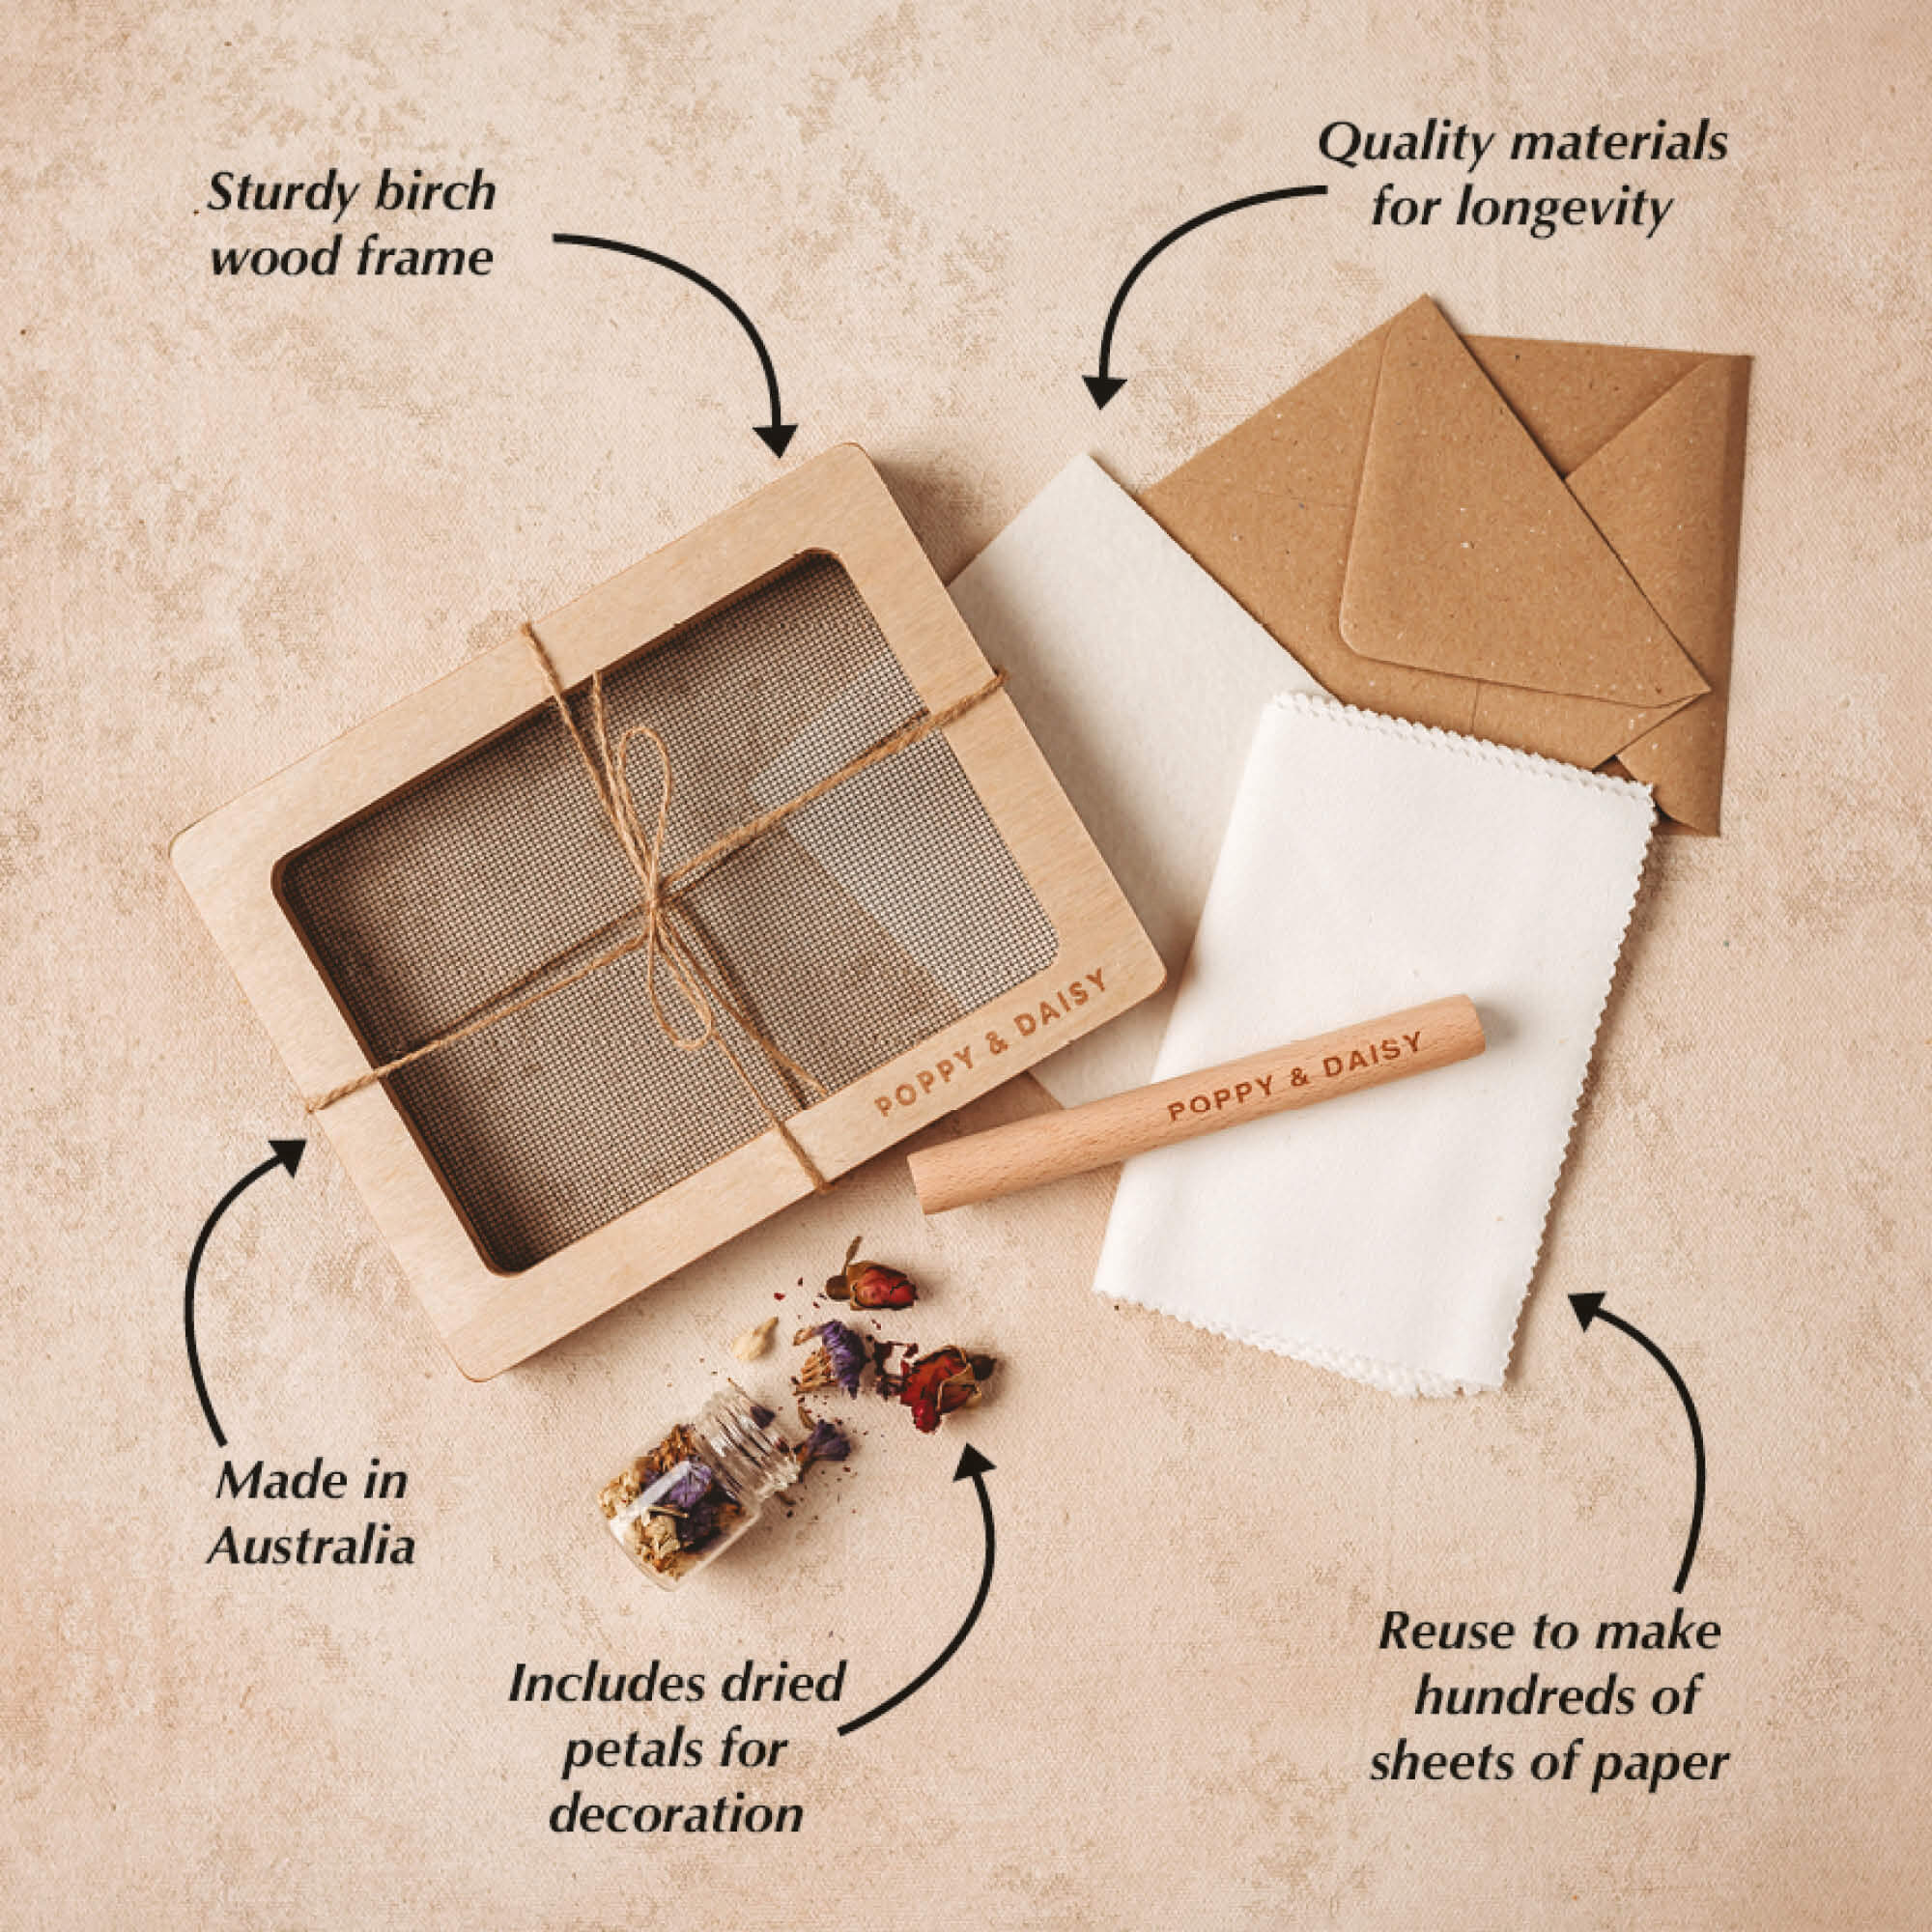 Paper making kit. Make DIY paper at home. Plastic free kit made in Australia by Poppy and Daisy.  From Your Wild Books